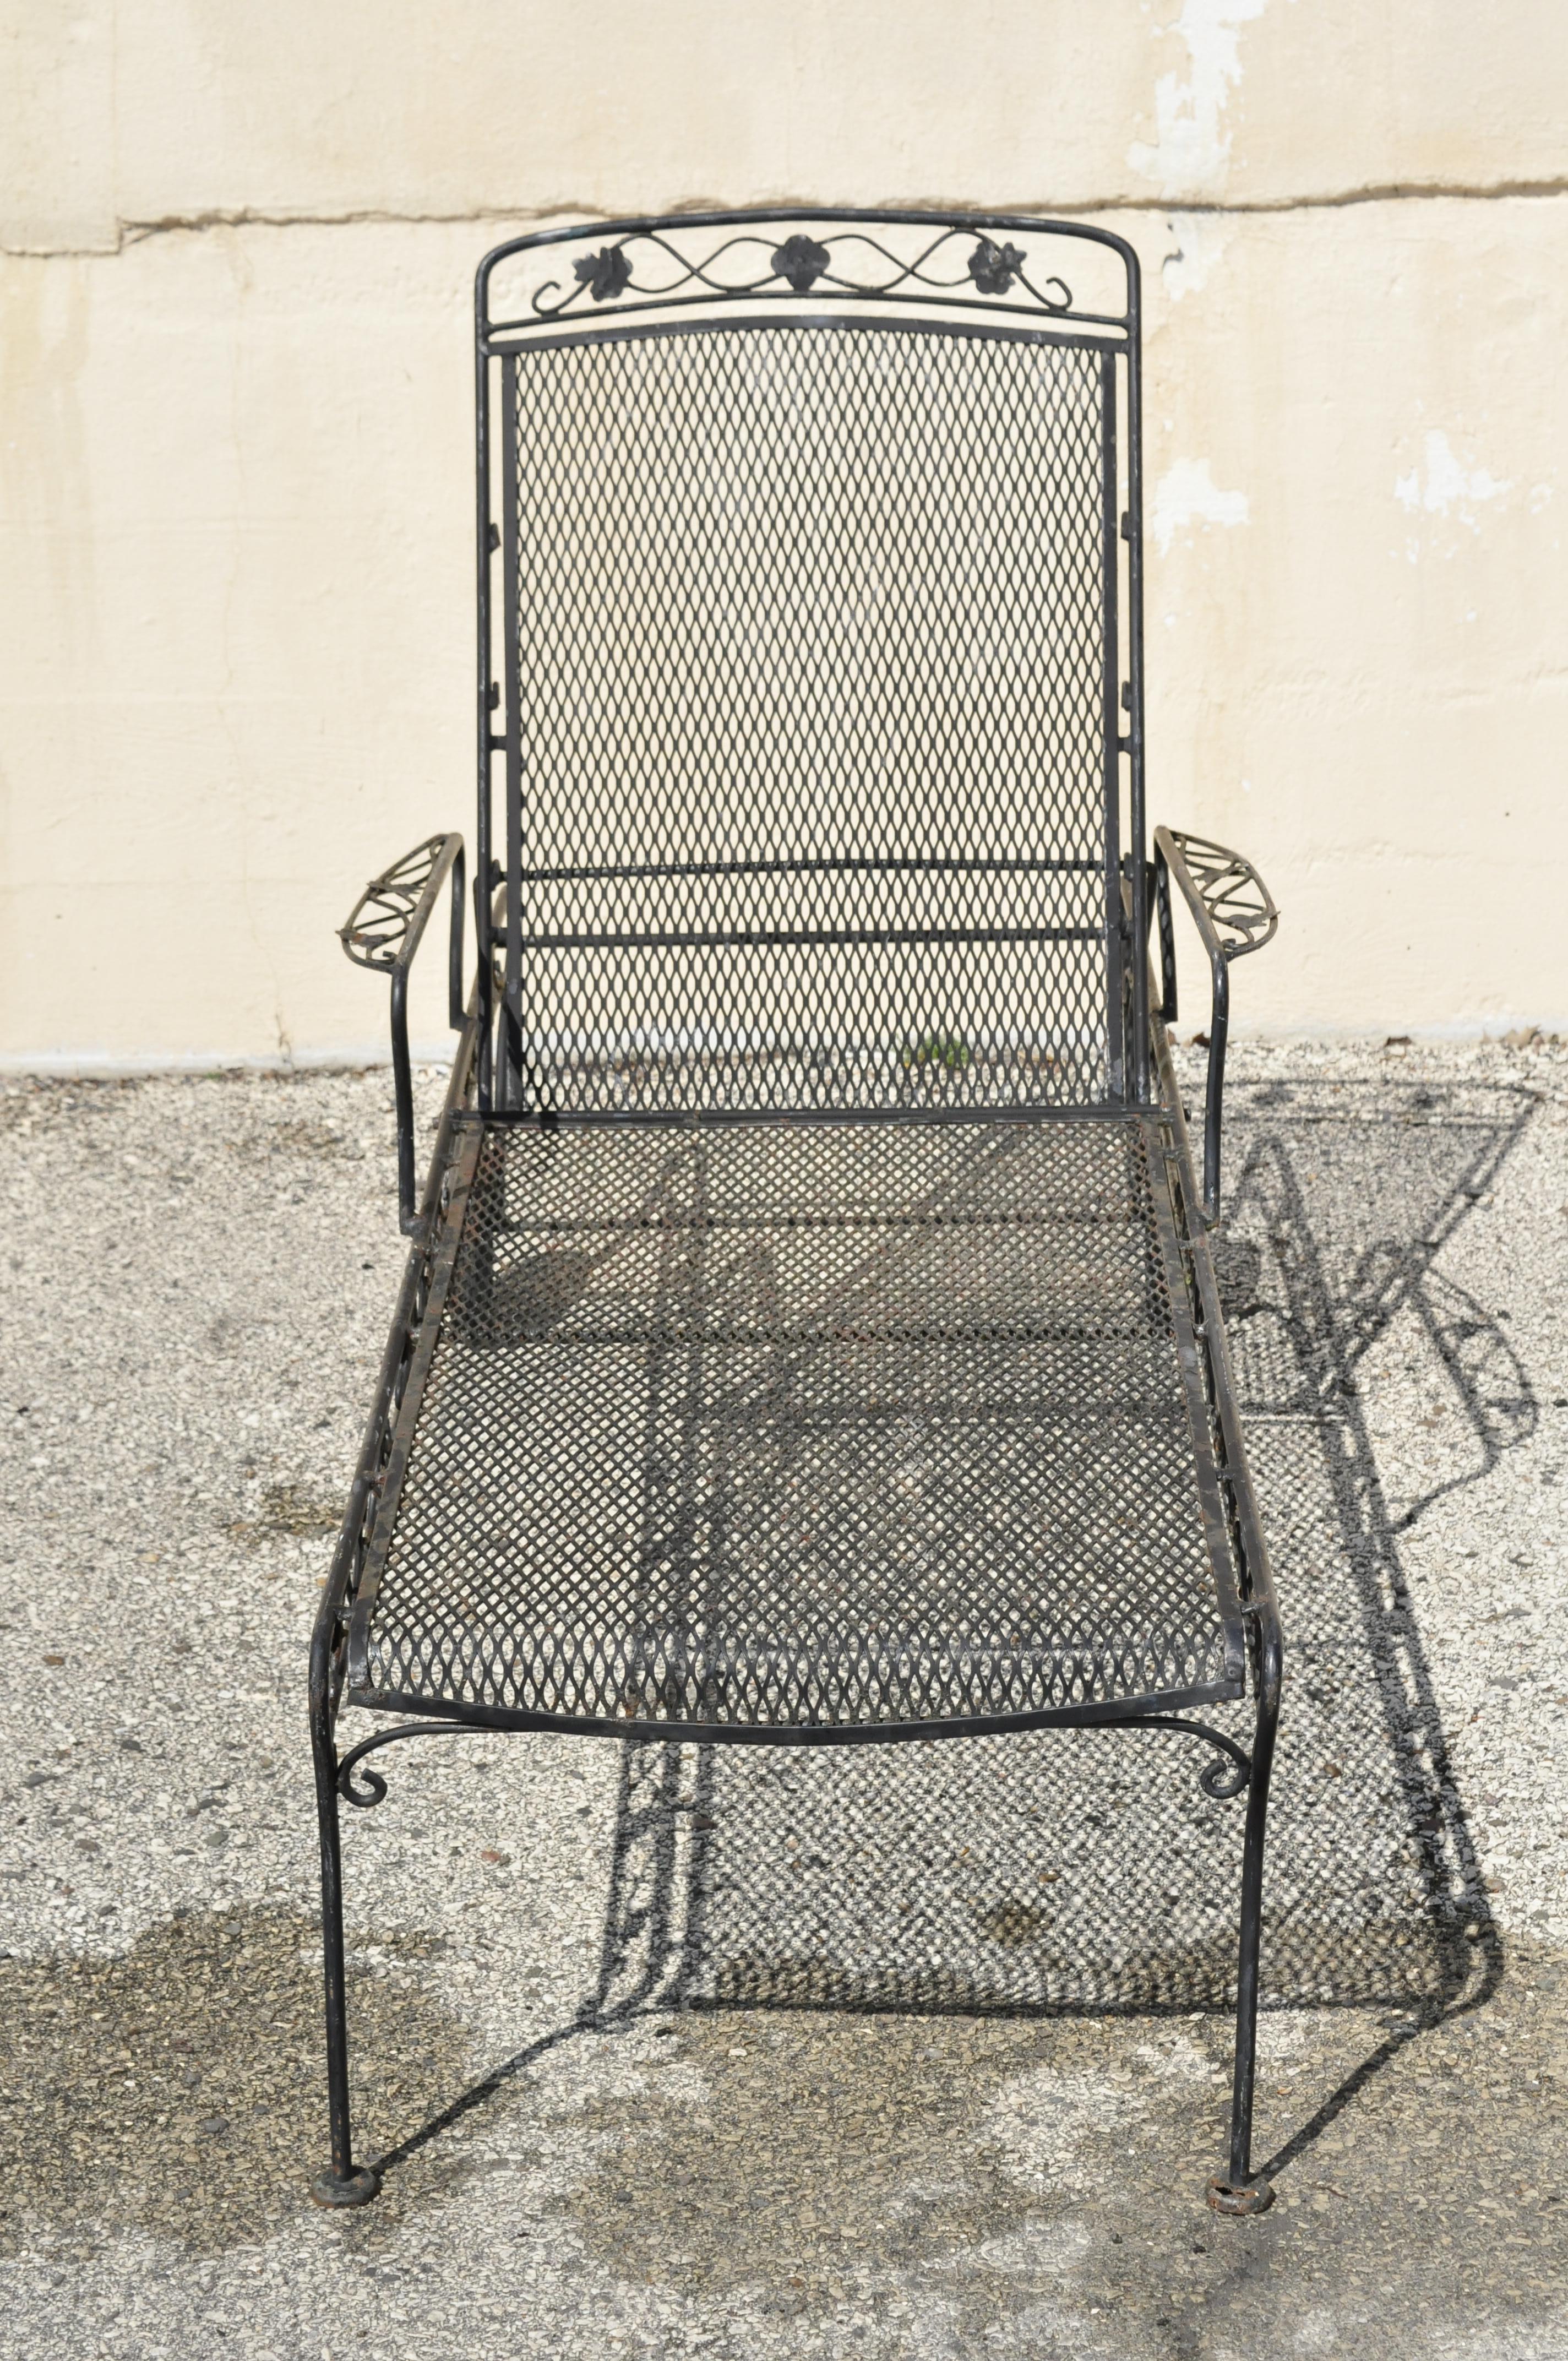 Pair of Russell Woodard patio garden reclining wrought iron chaise lounge chairs. Item features scrolling maple leaf design, metal mesh back and seat, adjustable/reclining back, rubber wheels, wrought iron construction, quality American